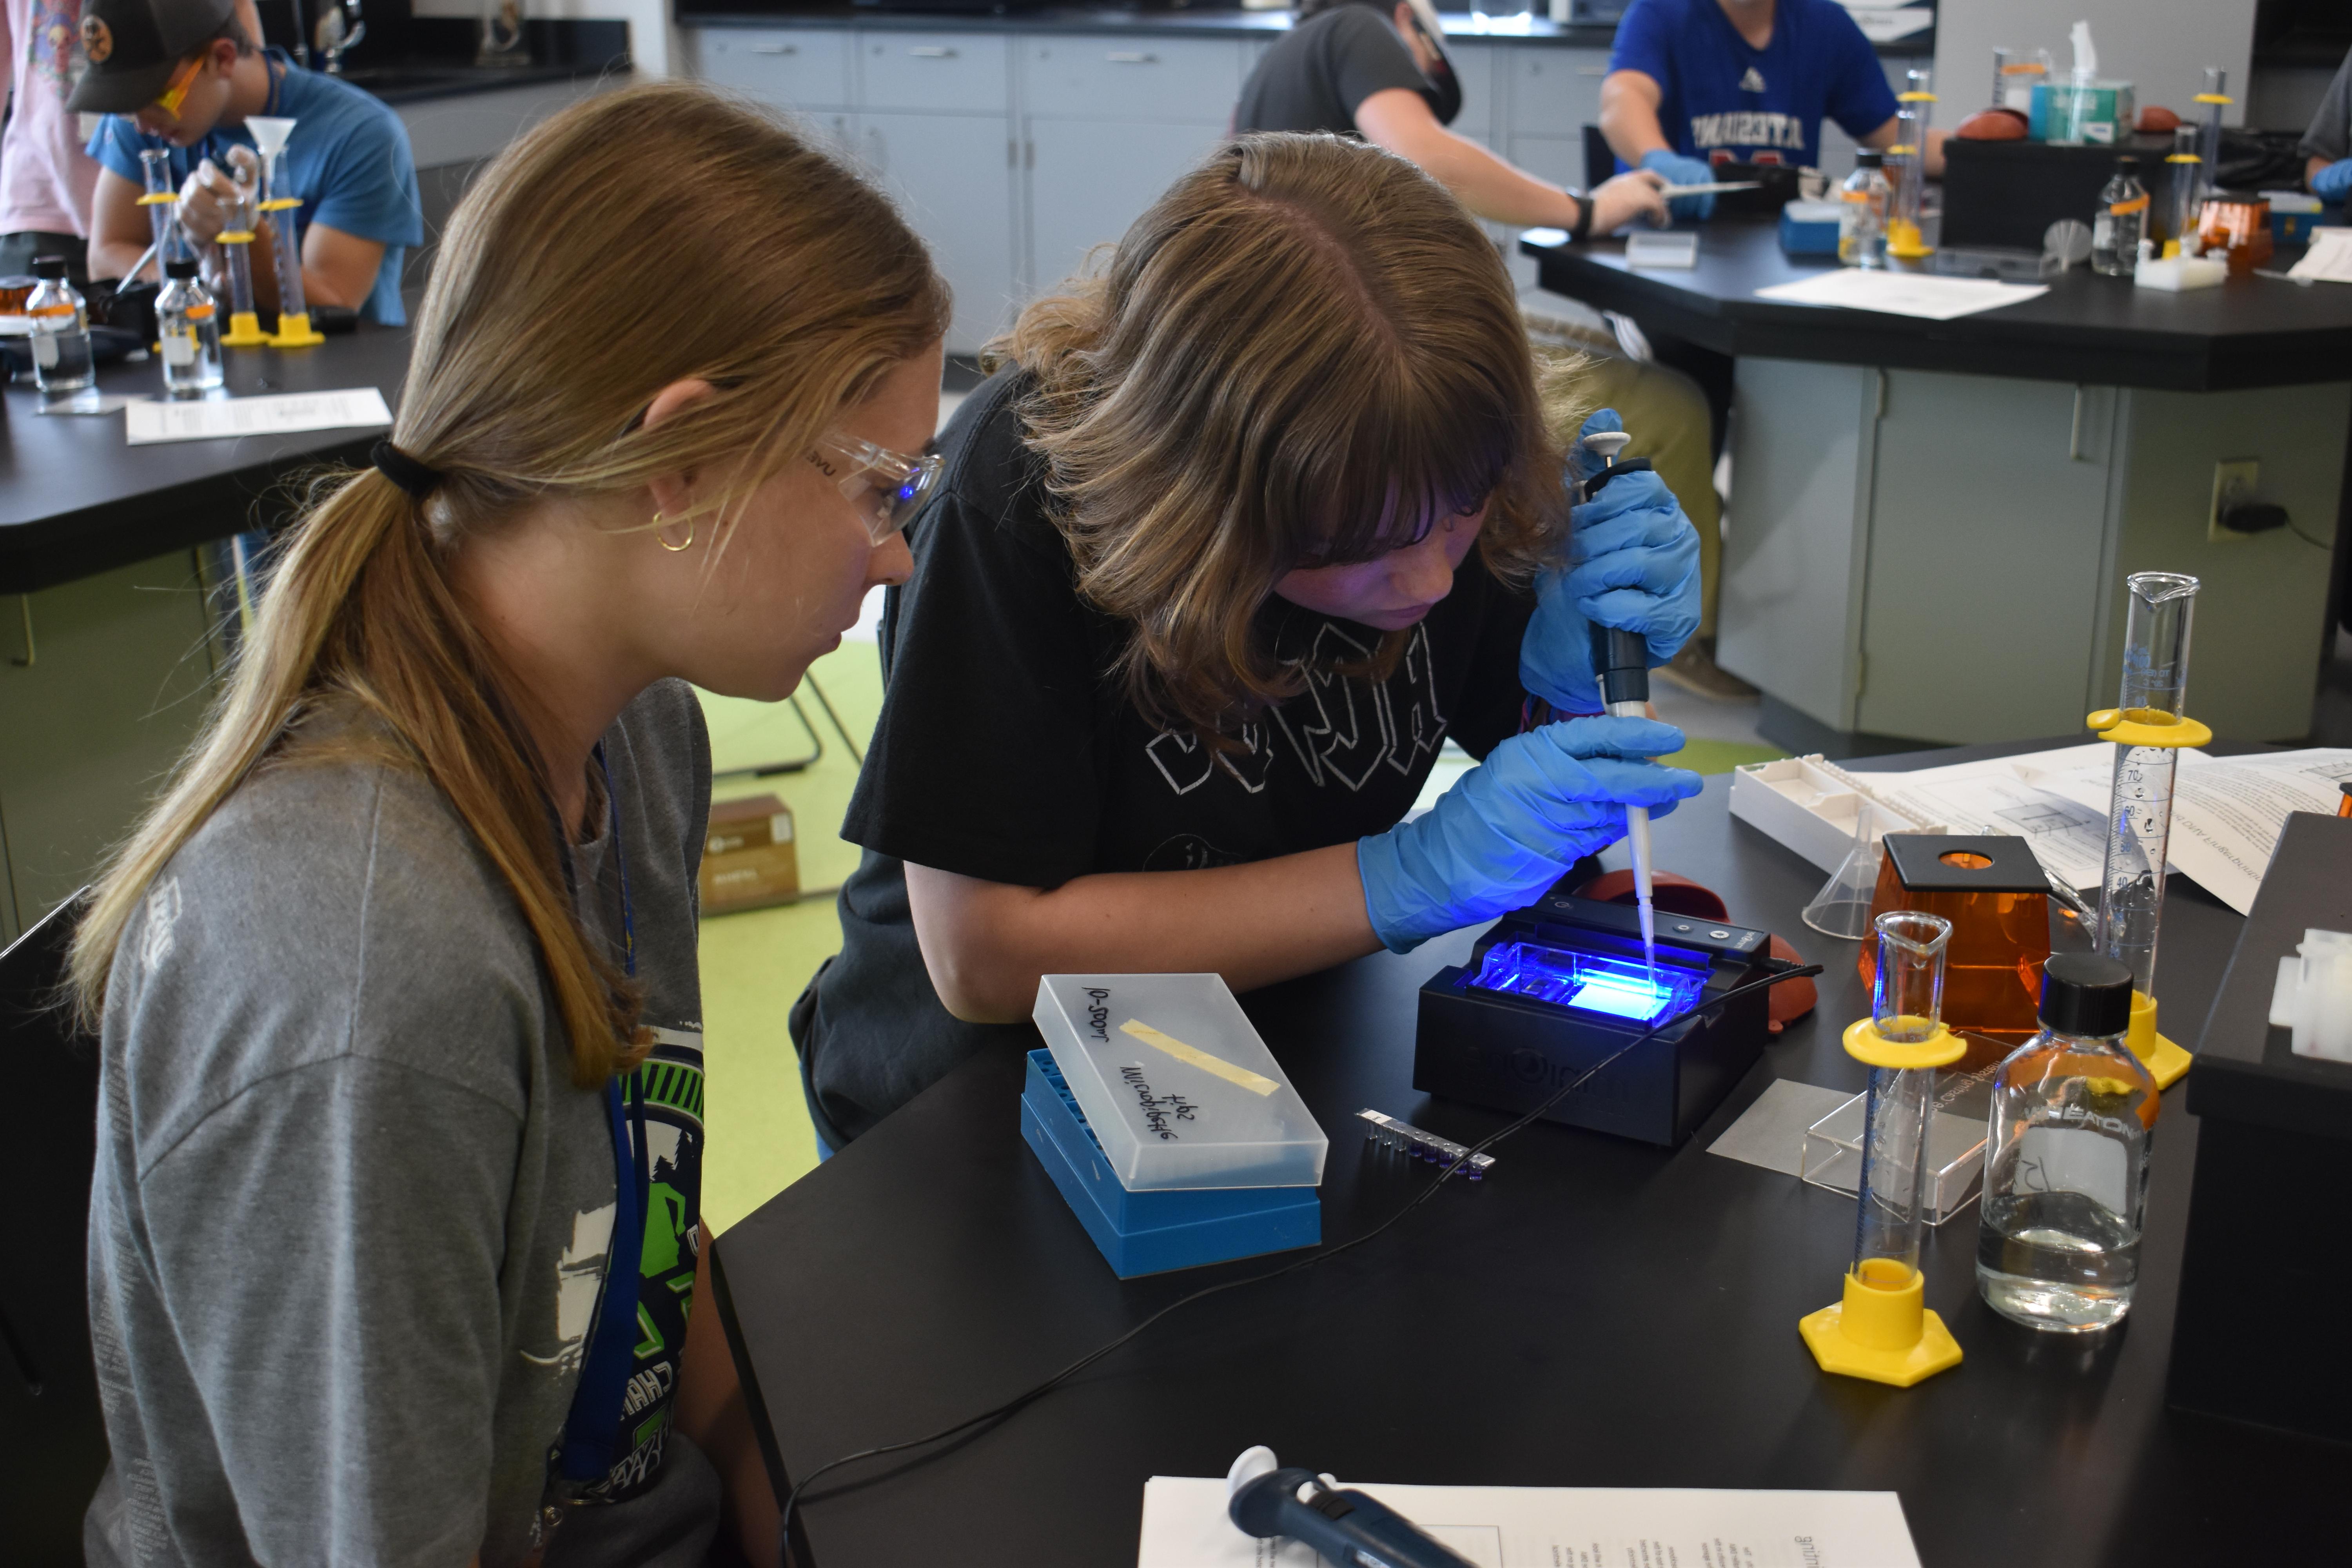 Female students in a science lab conduct a science experiment by dropping liquid using a pipette into vials.